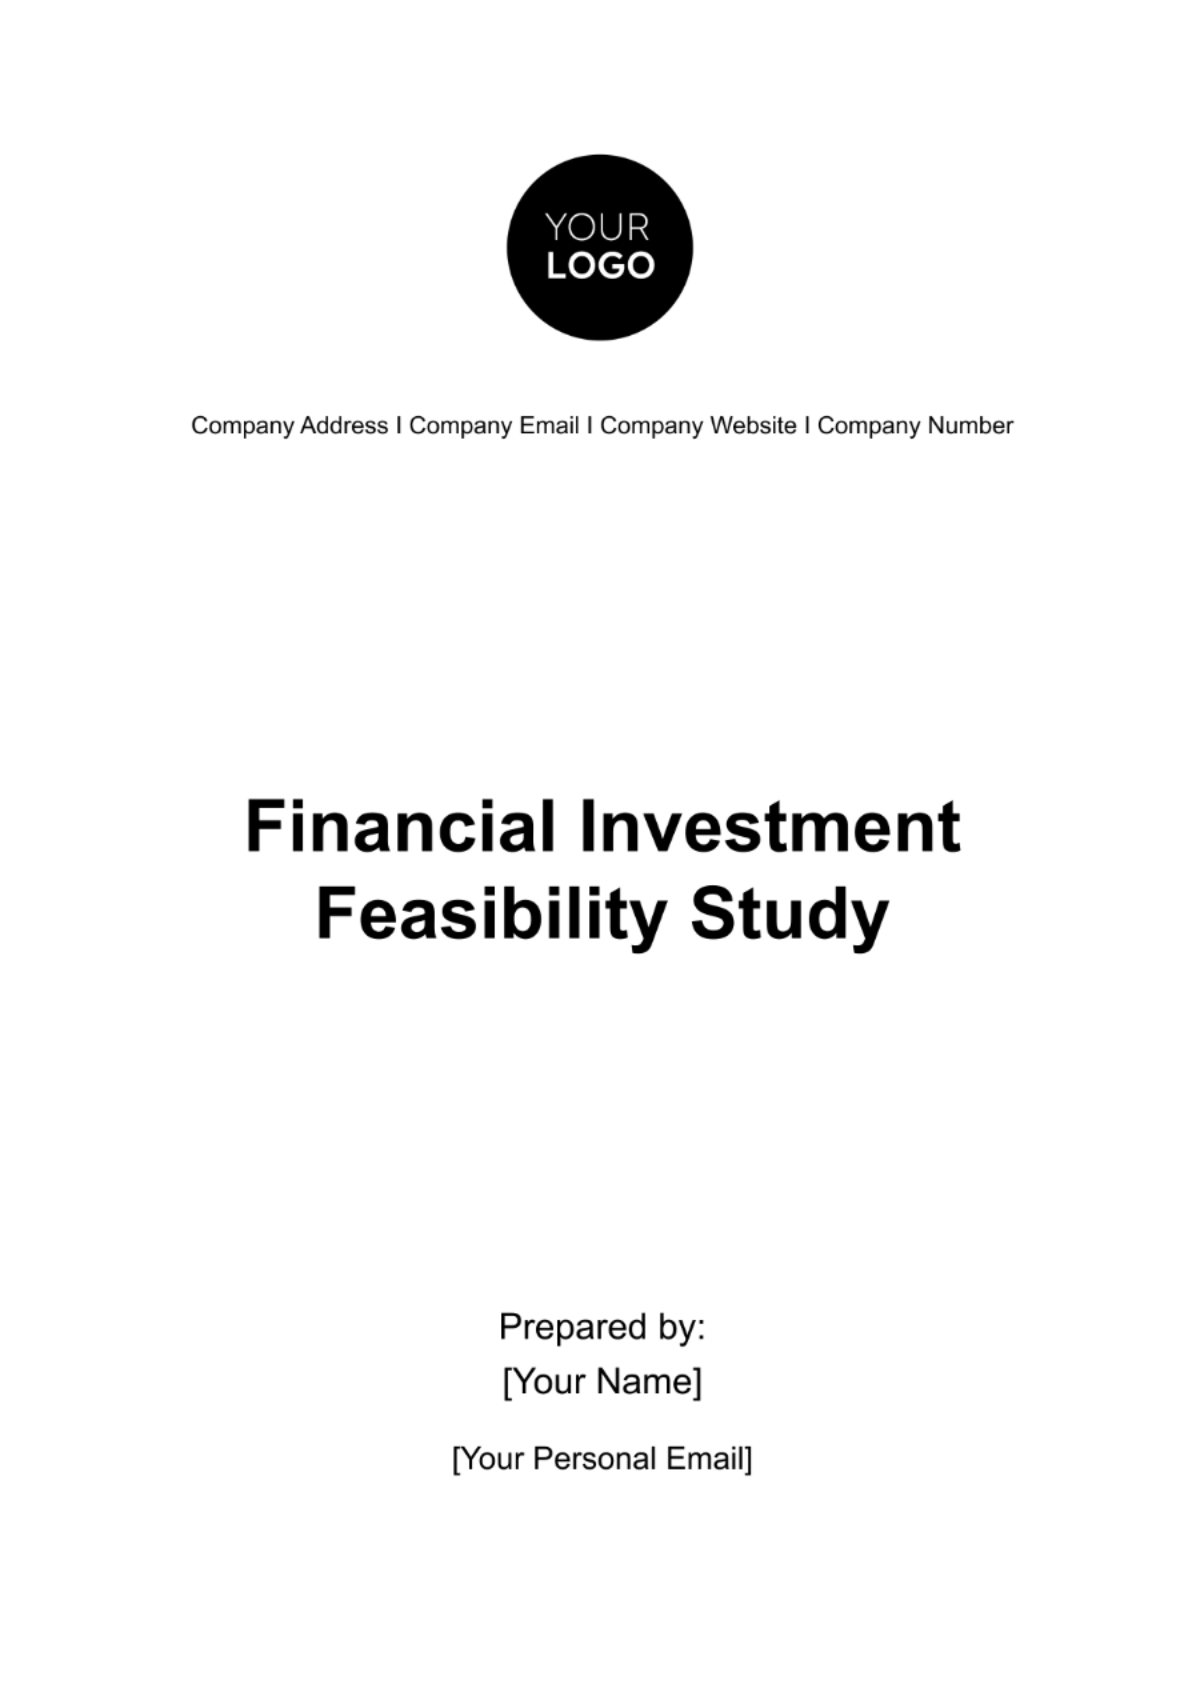 Financial Investment Feasibility Study Template